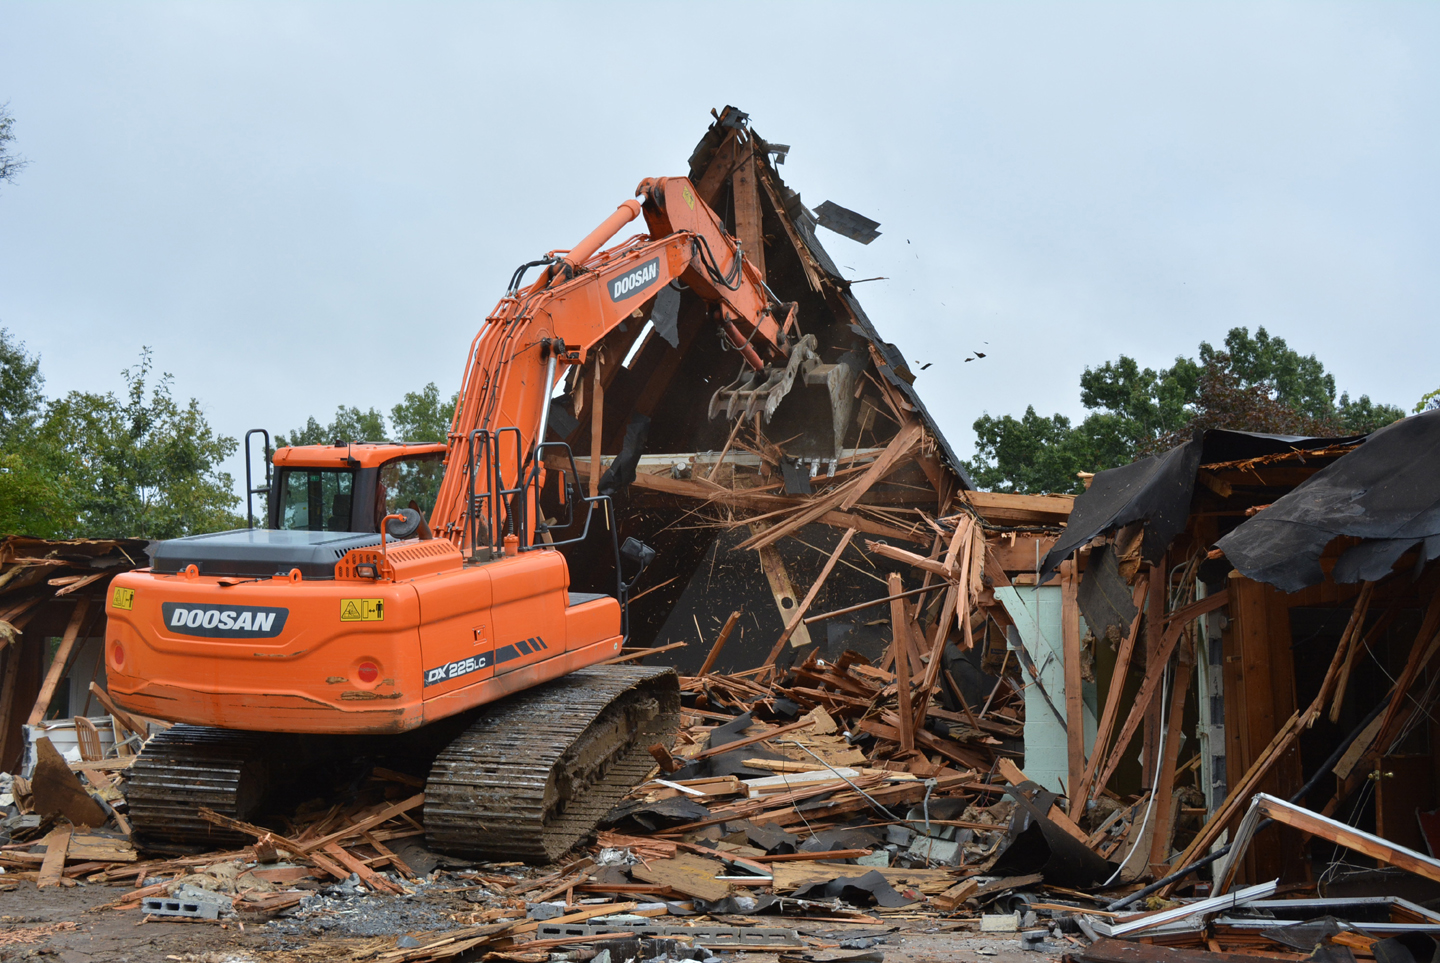 The former church at 985 N. Lapeer Rd. on the Oxford-Orion border was demolished last week. Photo by C.J. Carnacchio.